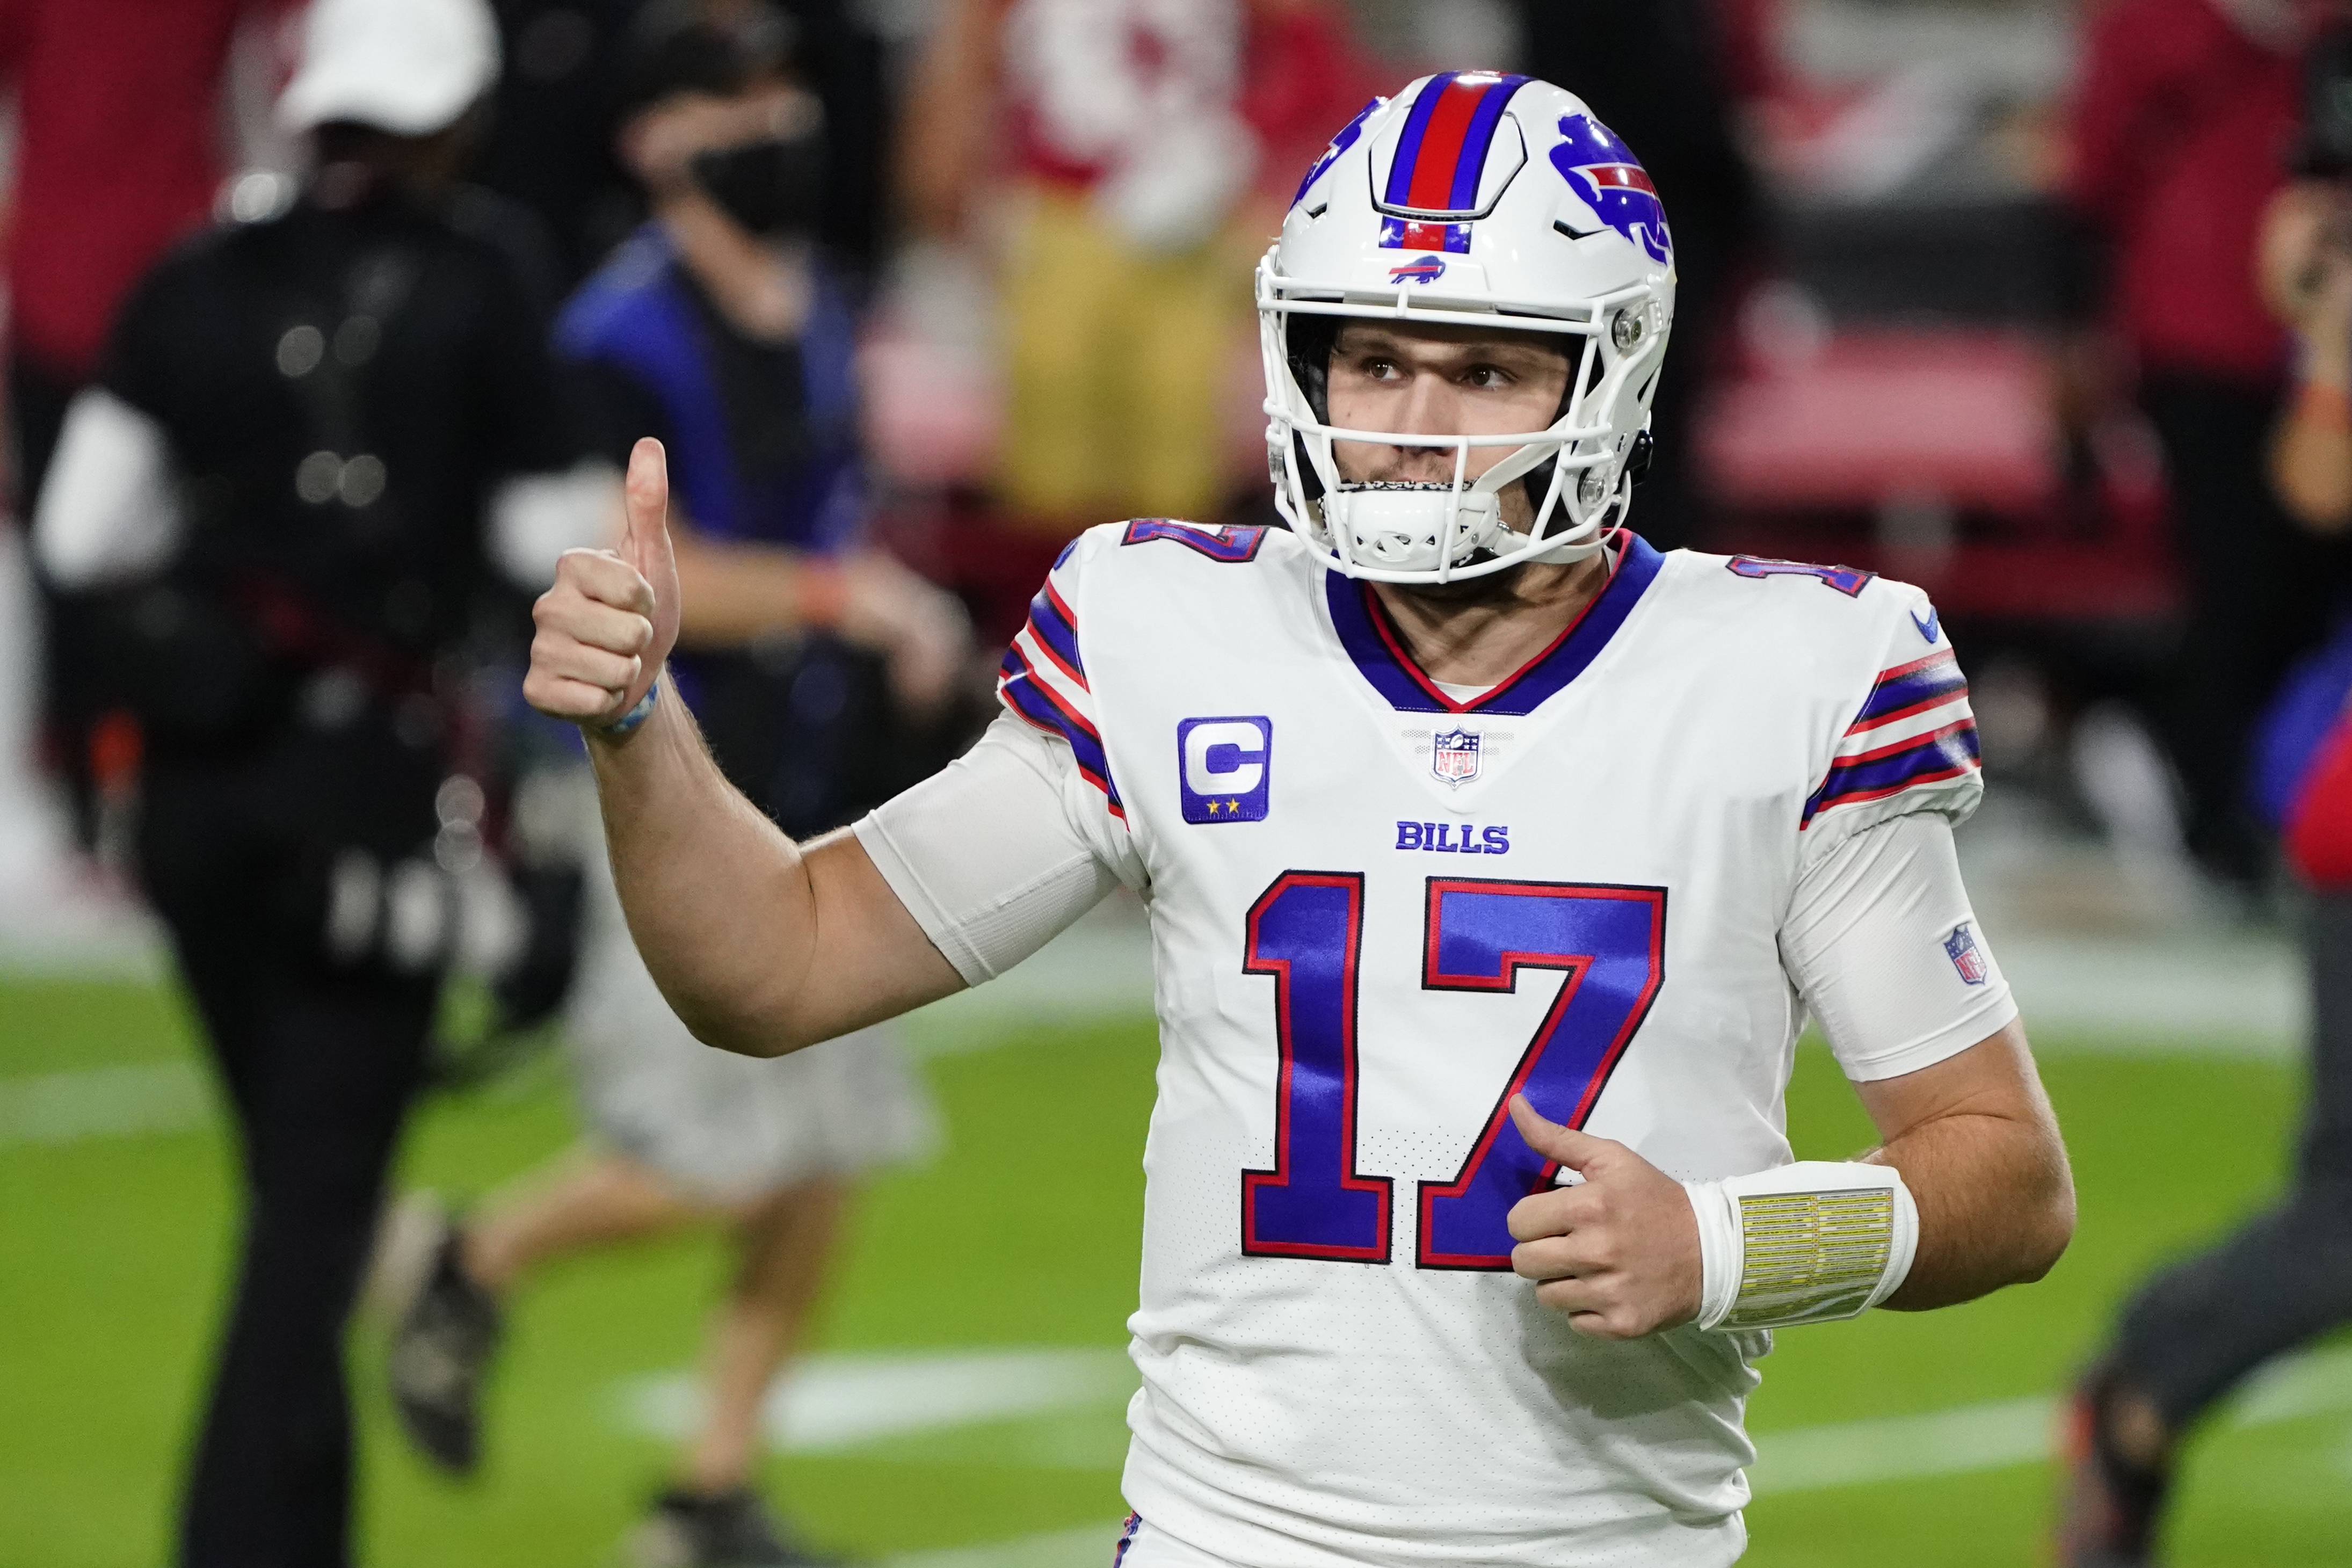 Put Bills' Josh Allen in your MVP conversation, or stay out of it.